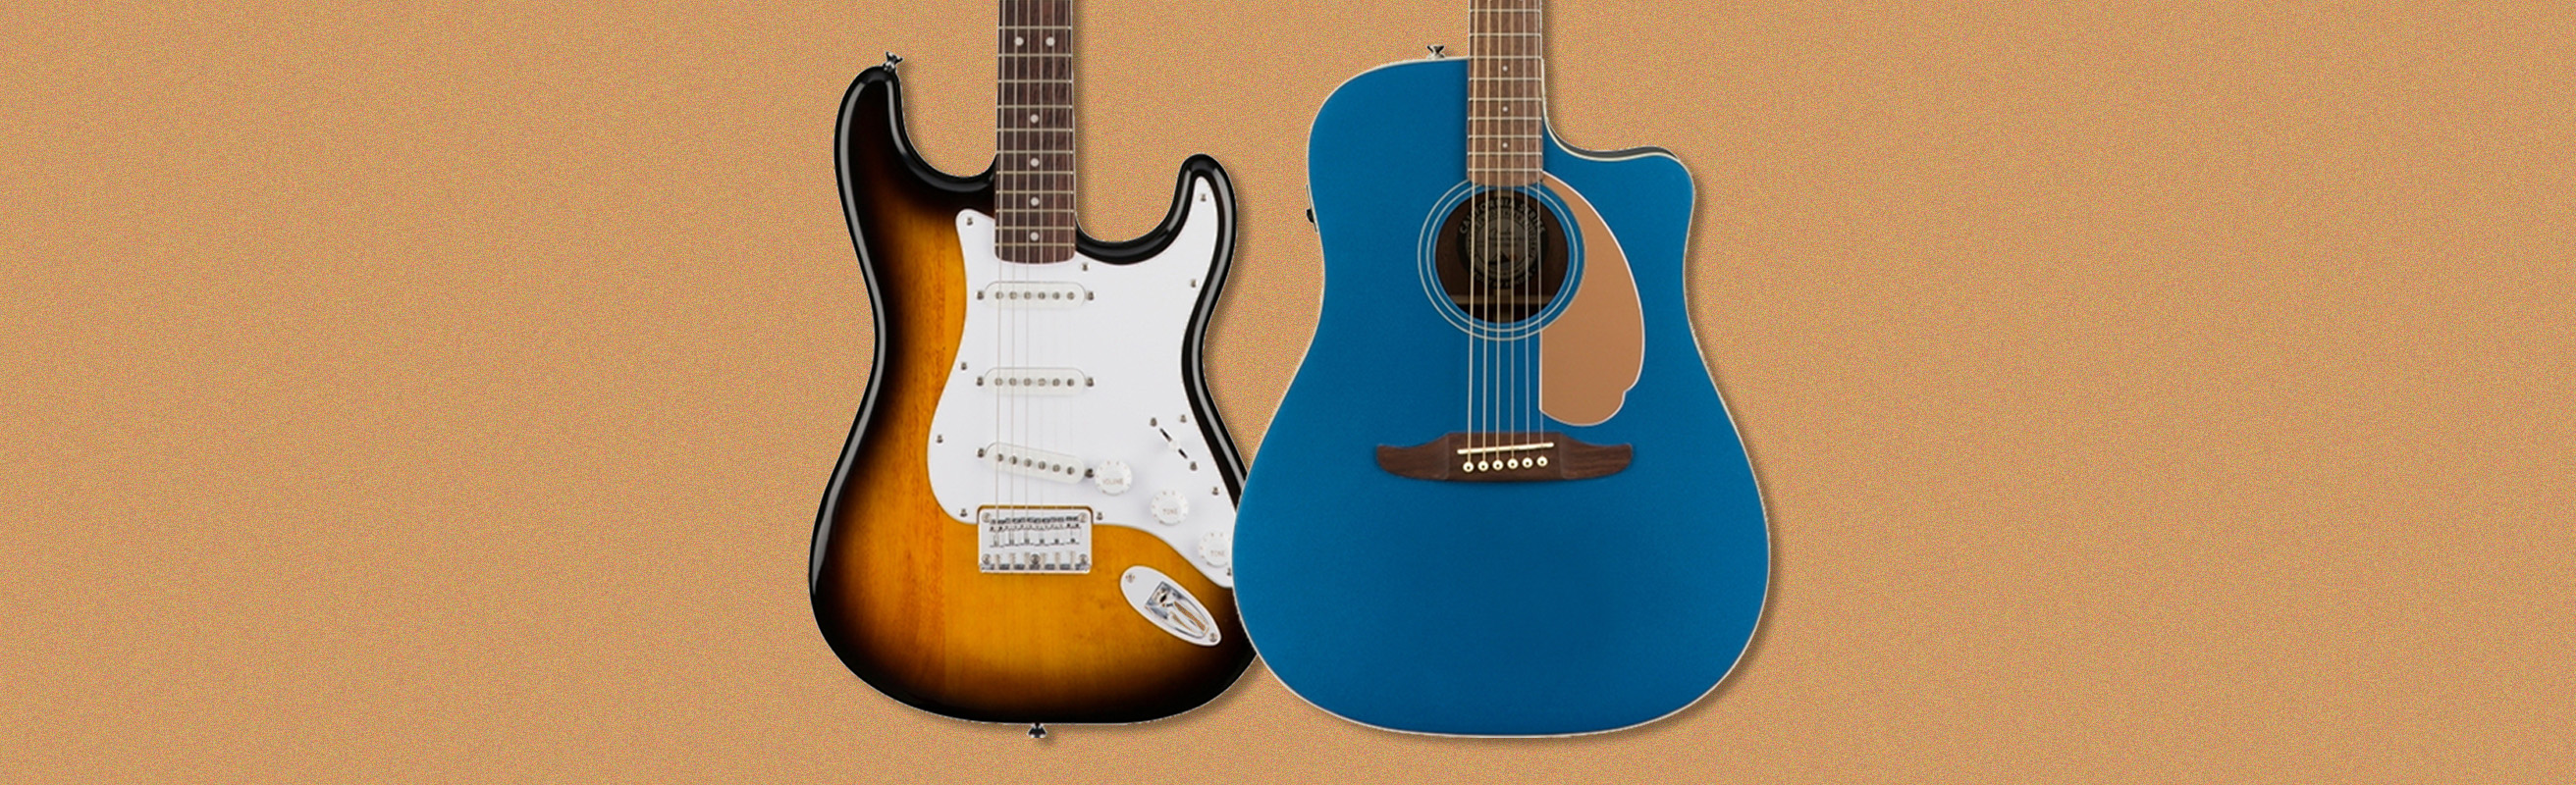 Fender Play Part II, Start Your Lessons— Acoustic Guitar, Electric